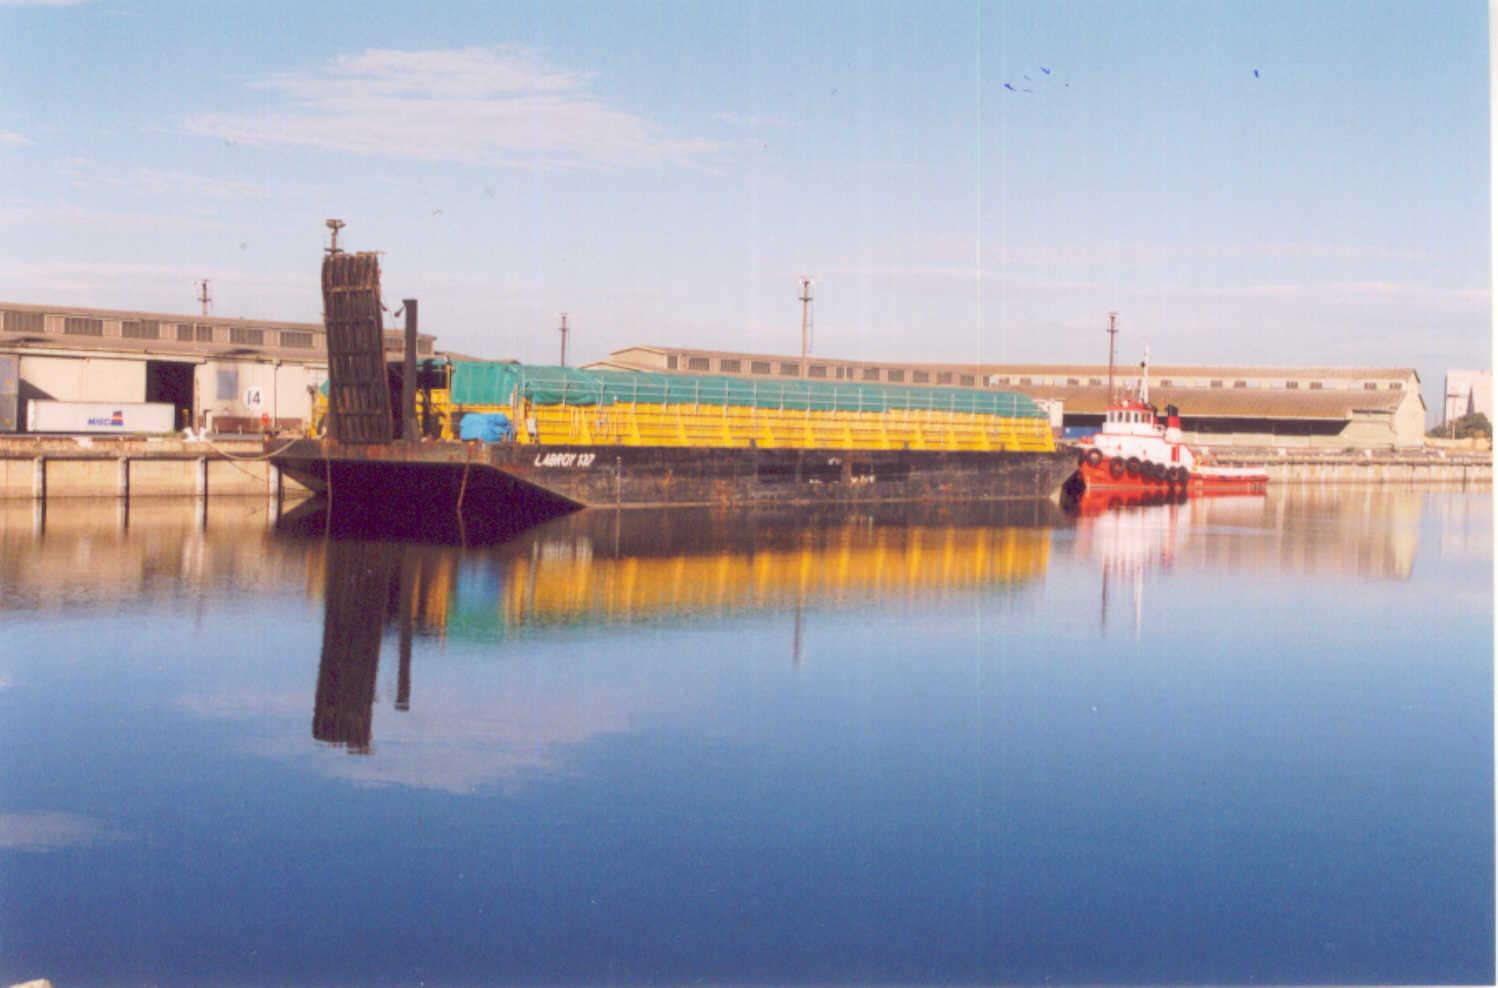 With barge at Port Adelaide